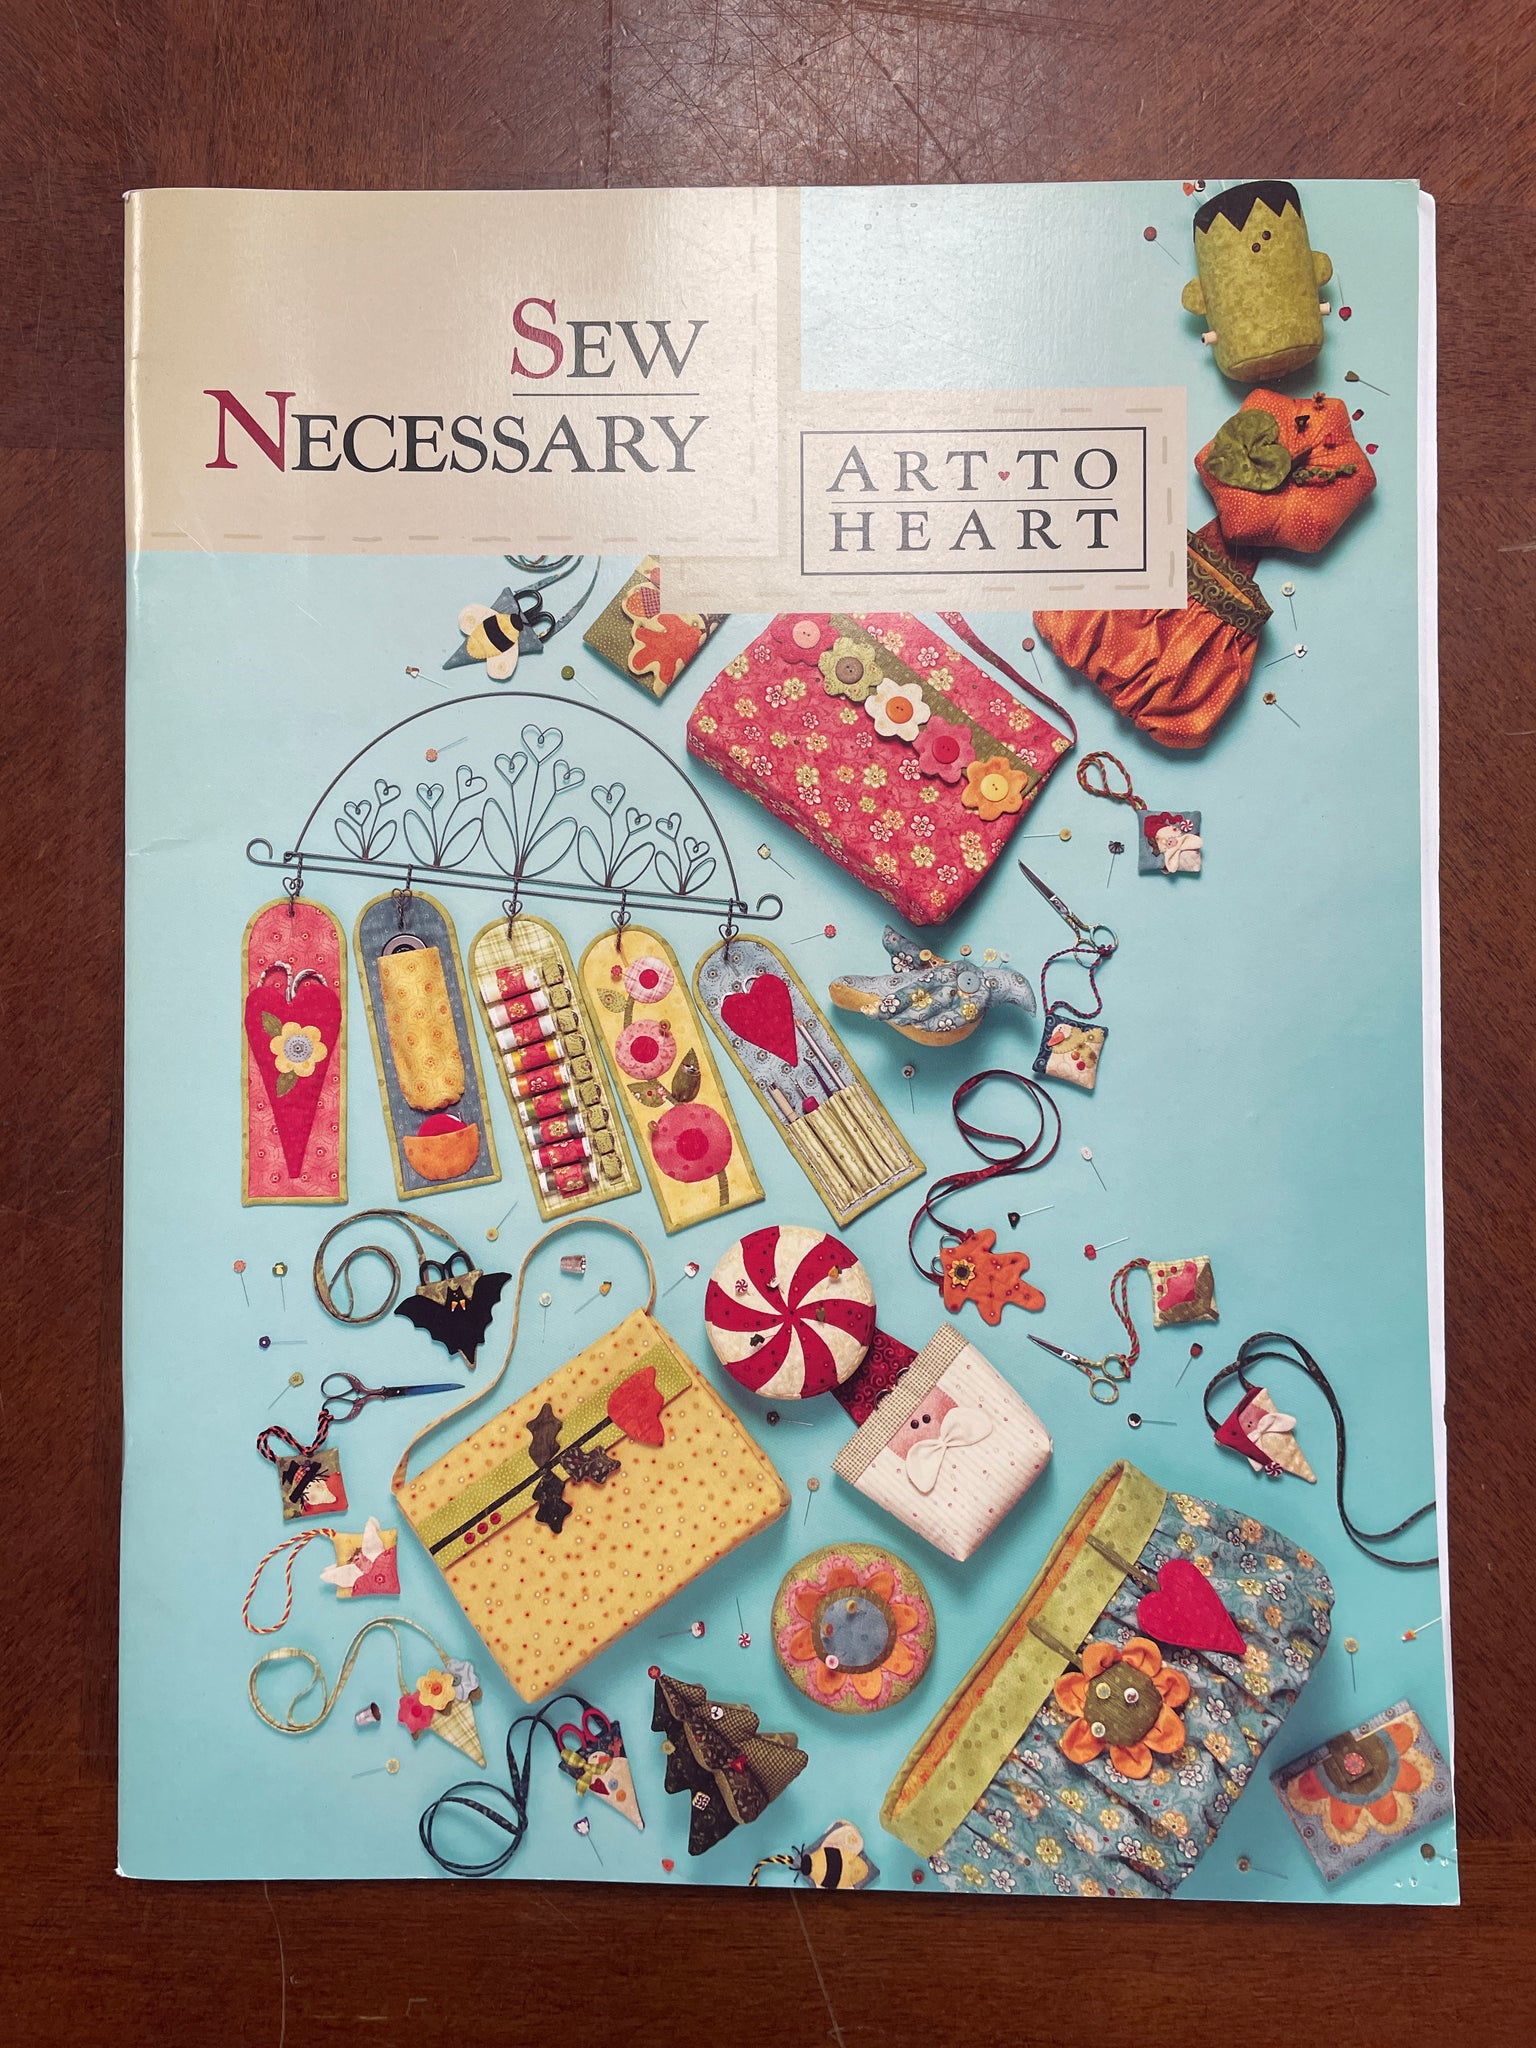 2009 Sewing Accessories Book - "Sew Necessary"